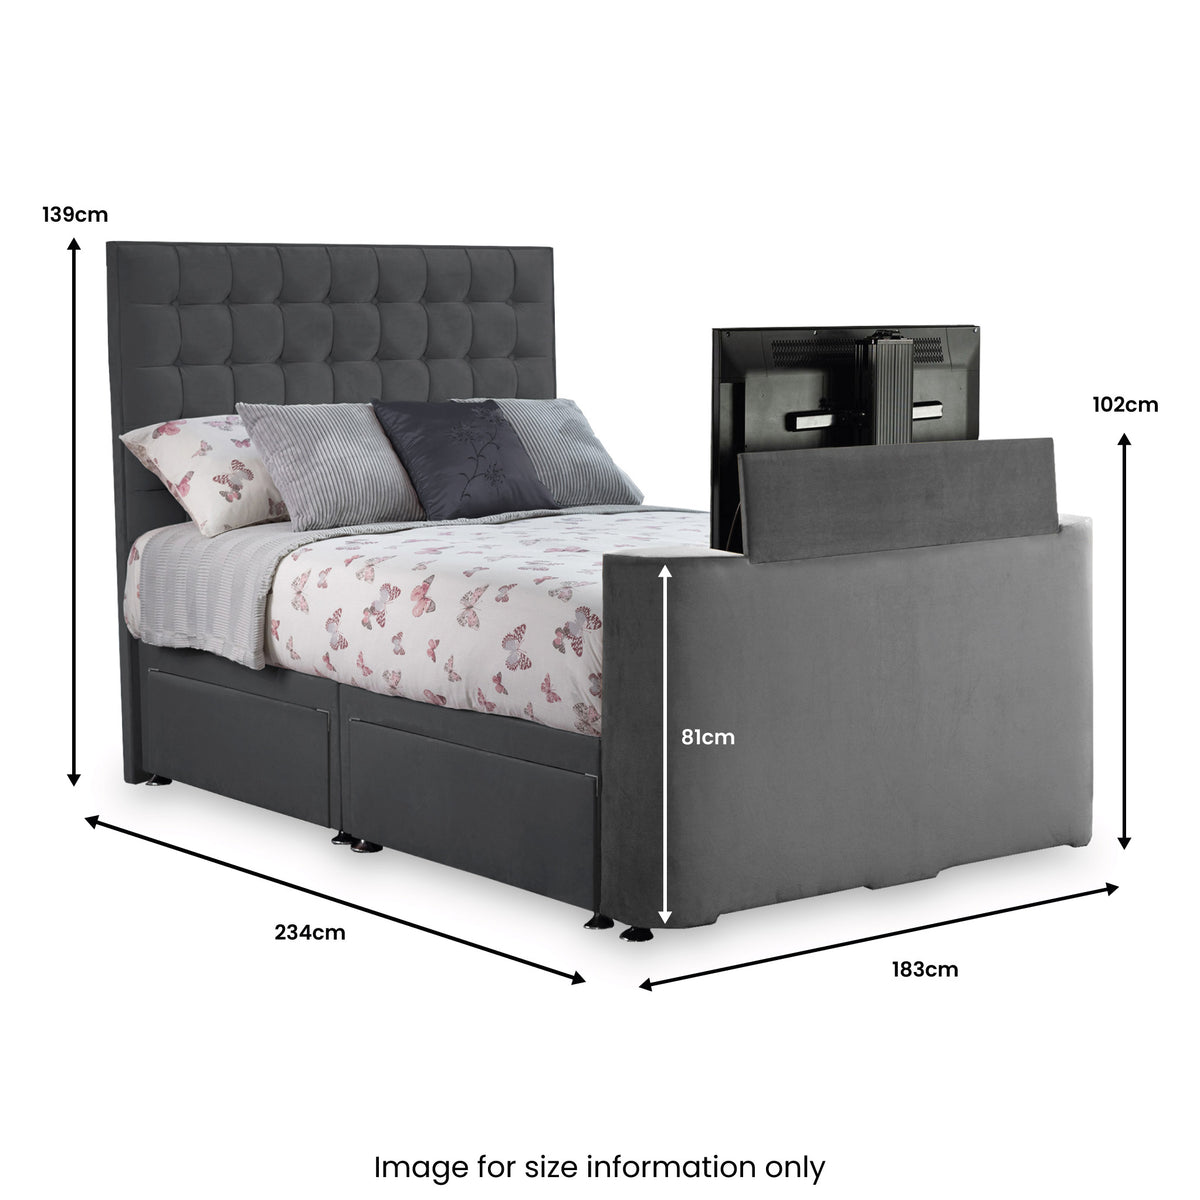 Bridgeford TV Bed 4 Drawer Dimensions from Roseland Furniture